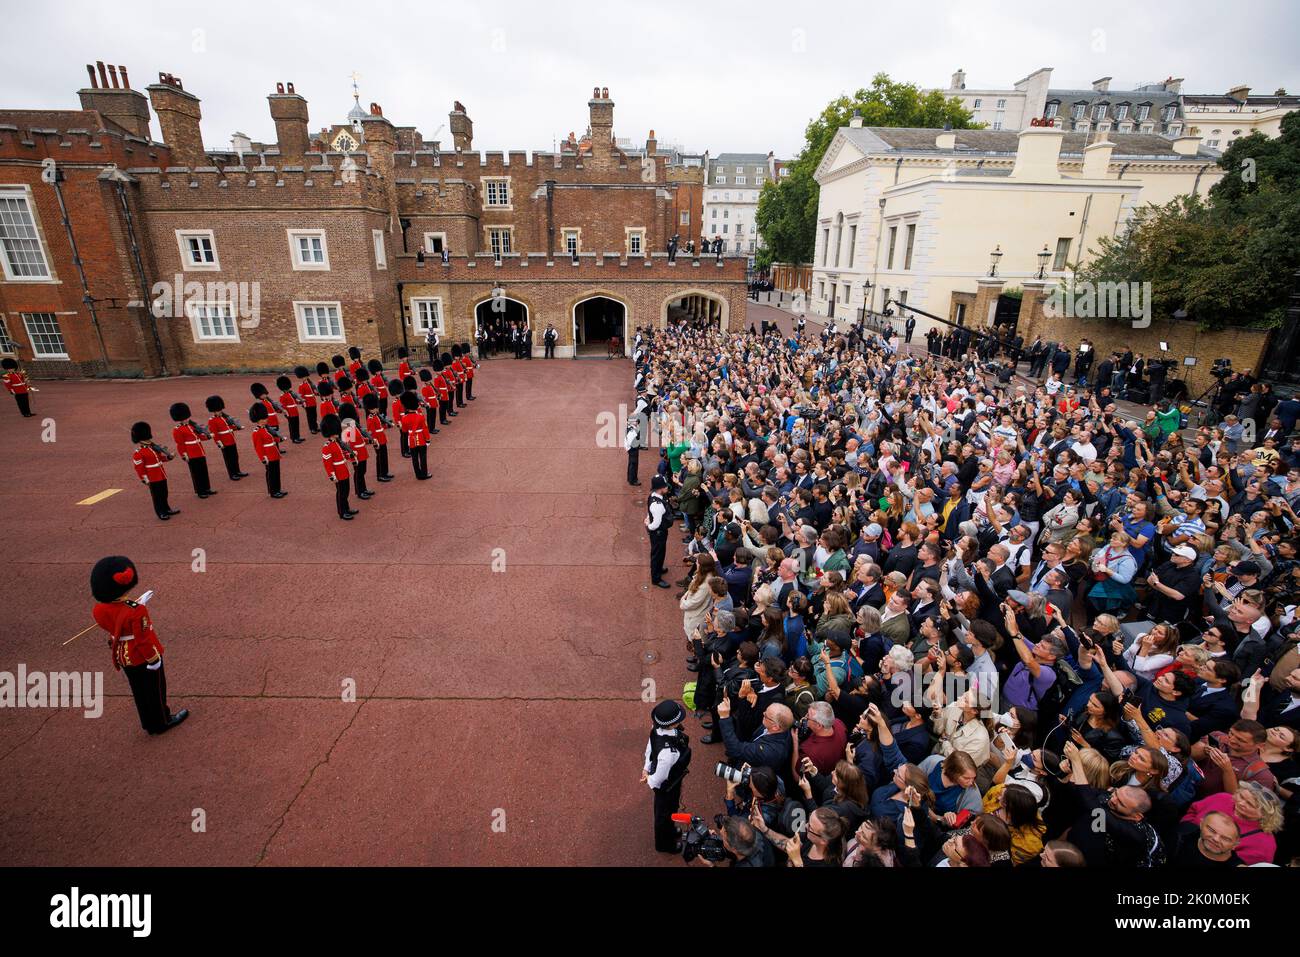 Members of the Coldstream guards take part in the Proclamation ceremony in Friary Court before the accession council, as King Charles III is proclaime Stock Photo